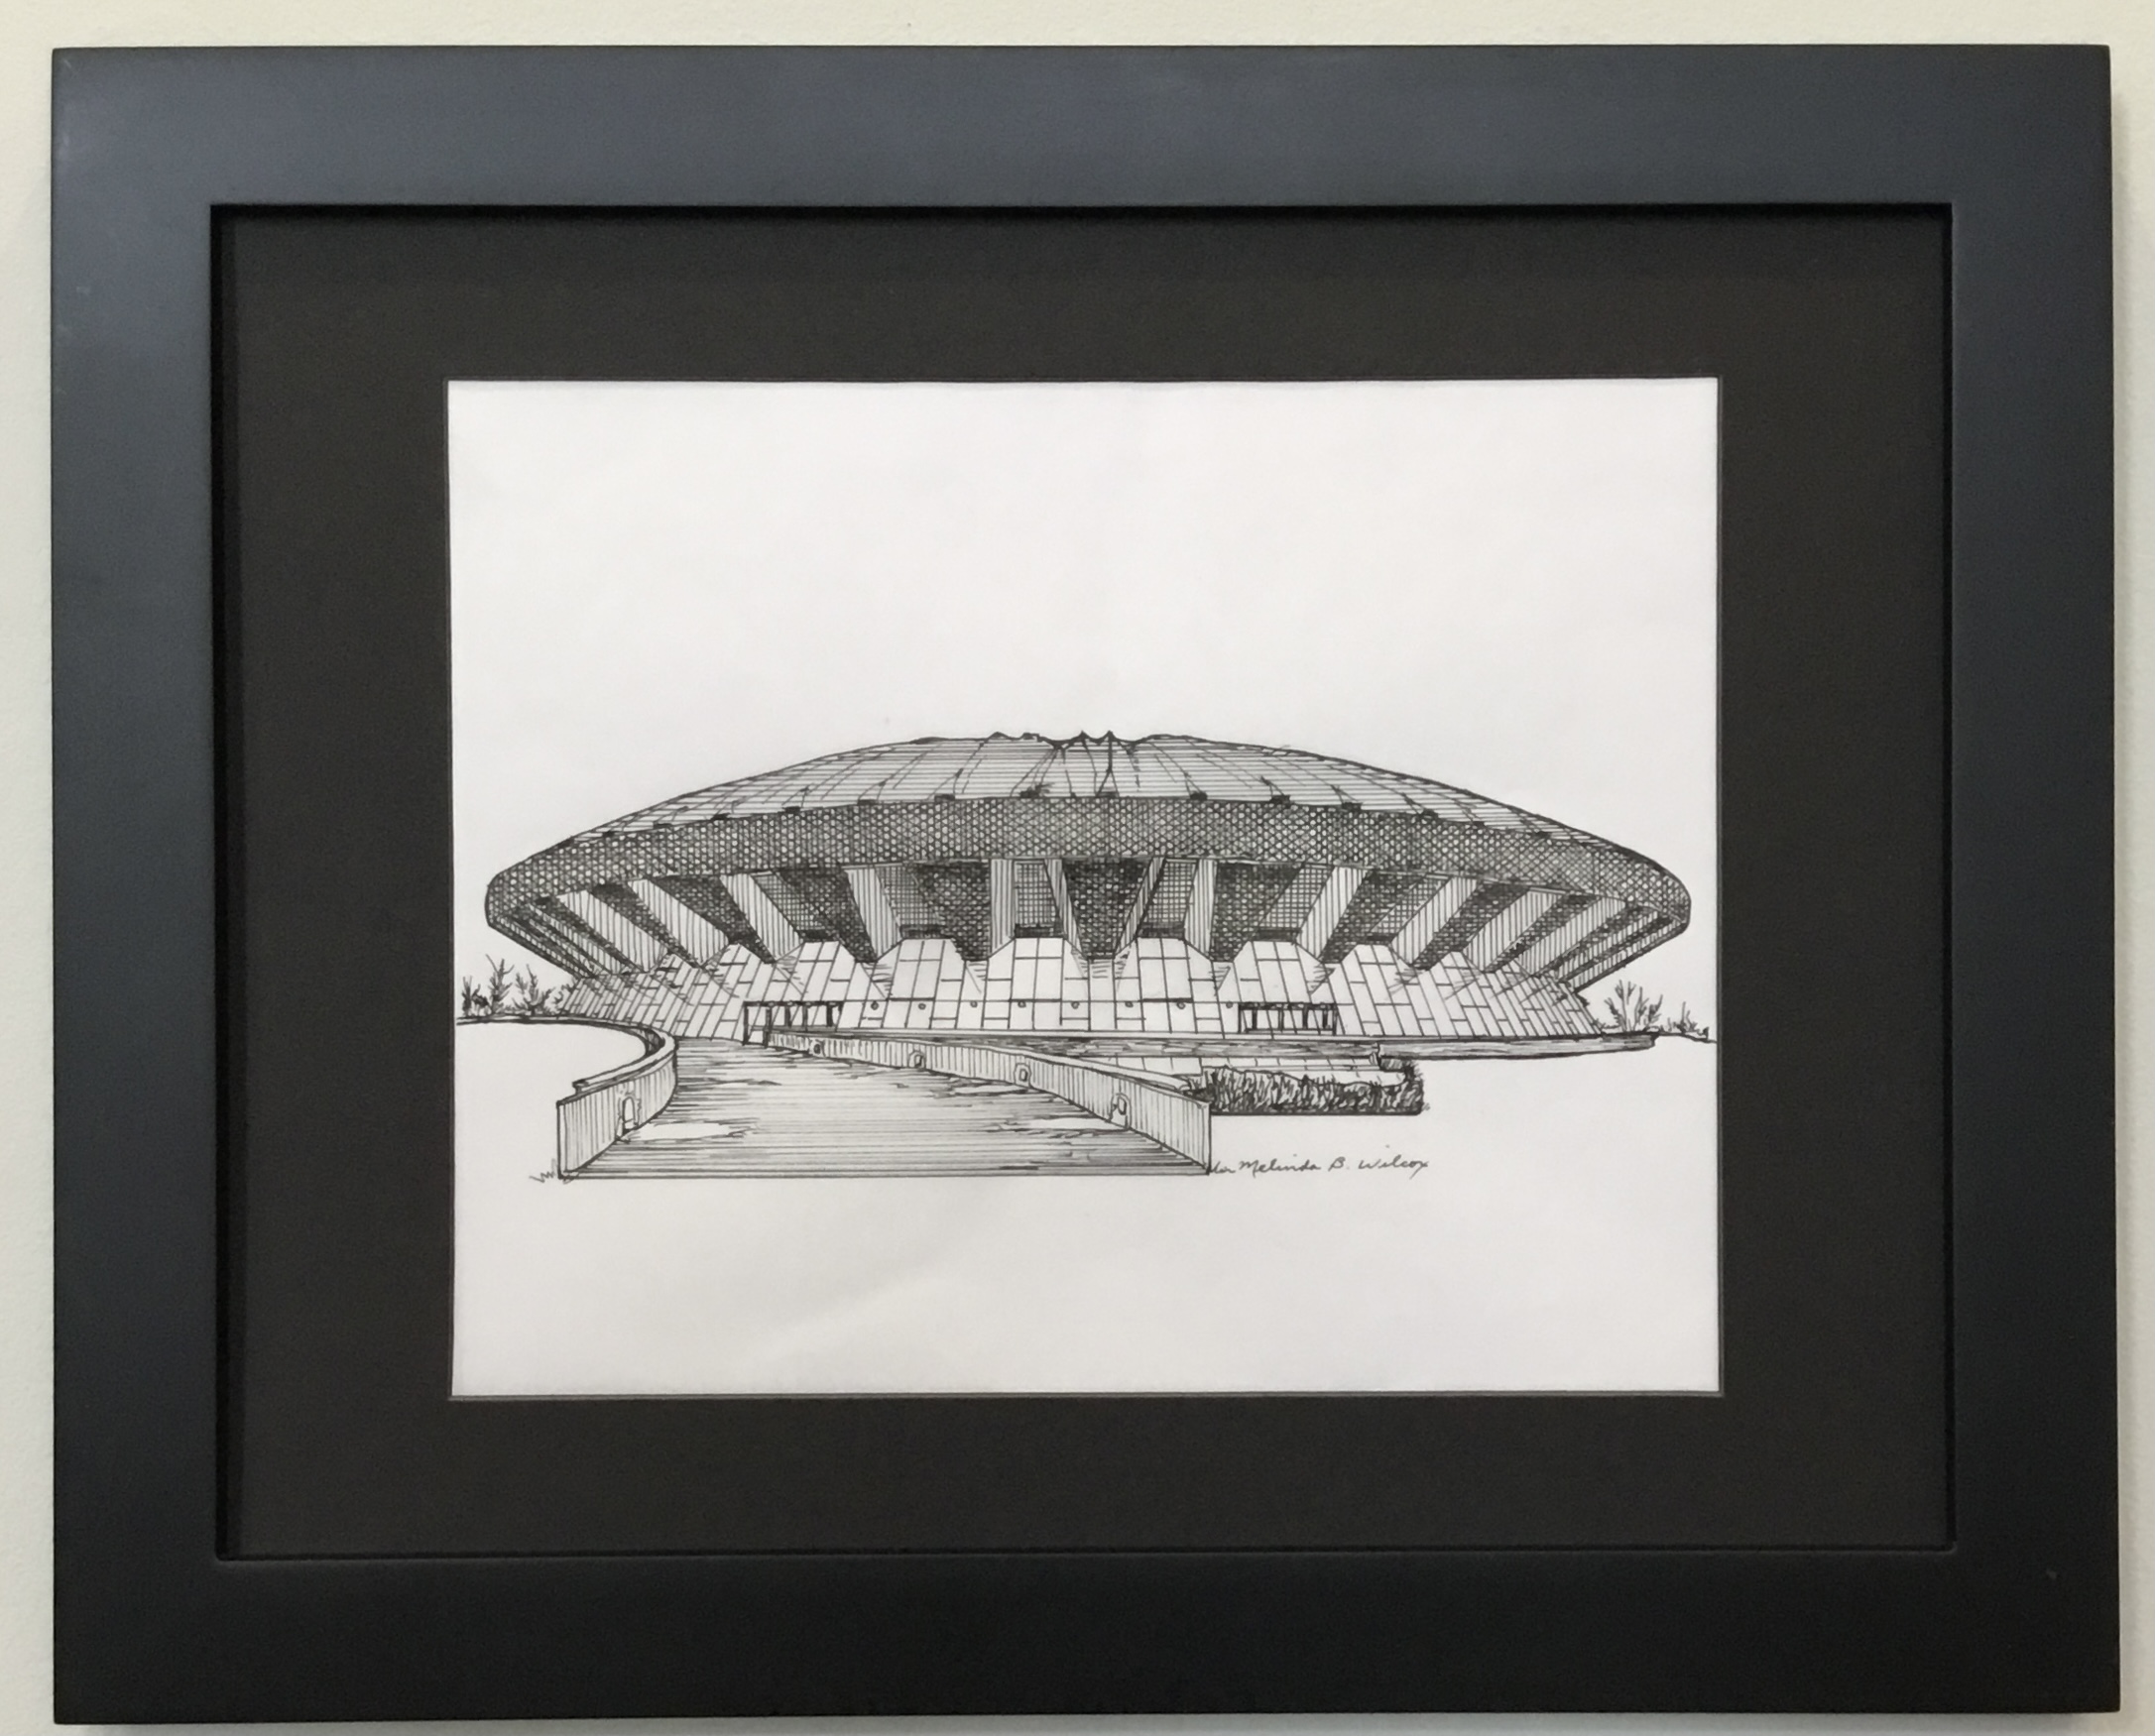 State Farm Center (Assembly Hall)
Pen and Ink
10" X 8"
$150